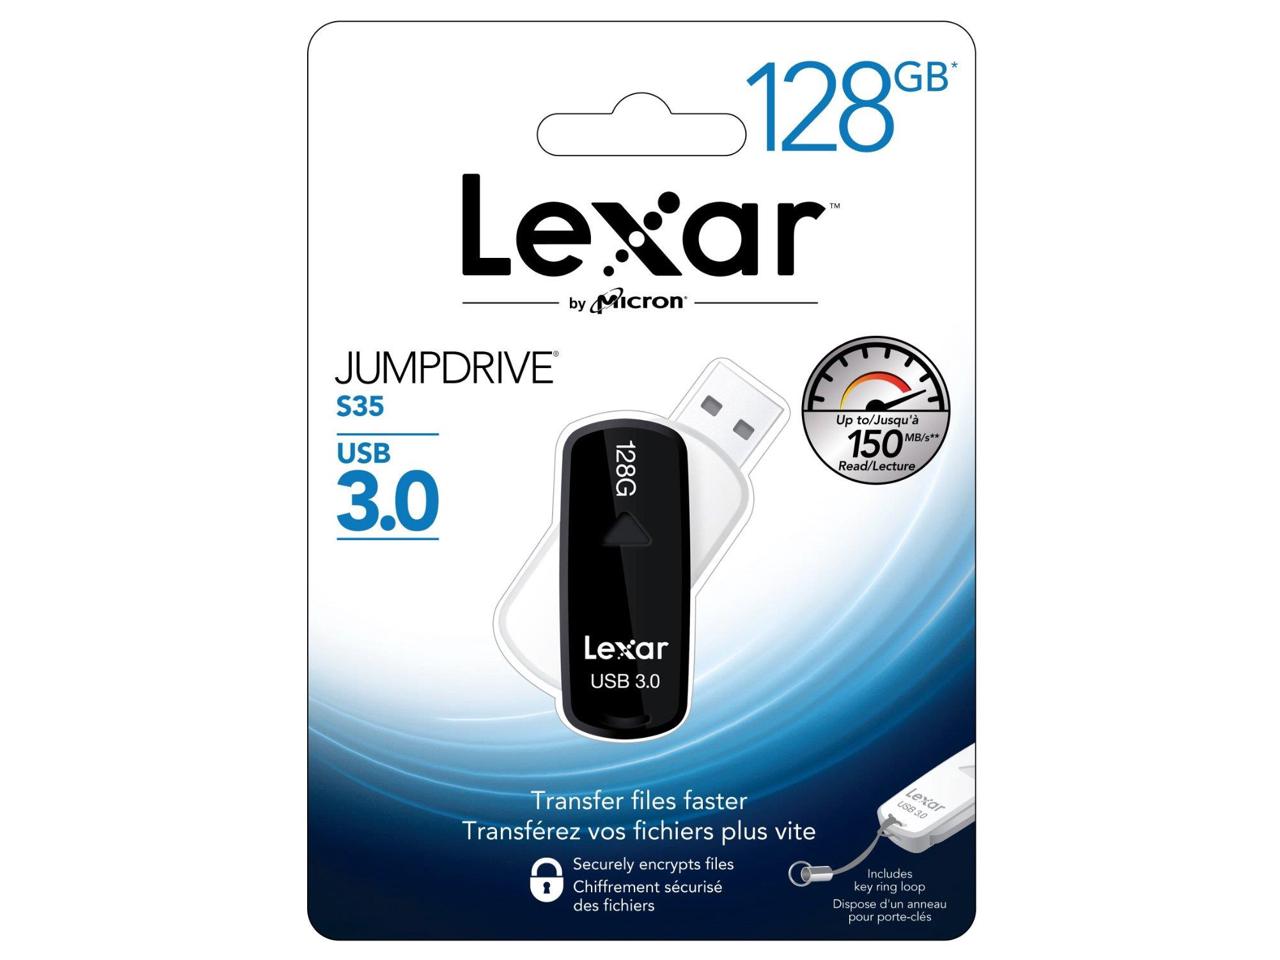 Lexar 128GB flash drive for $23 with code